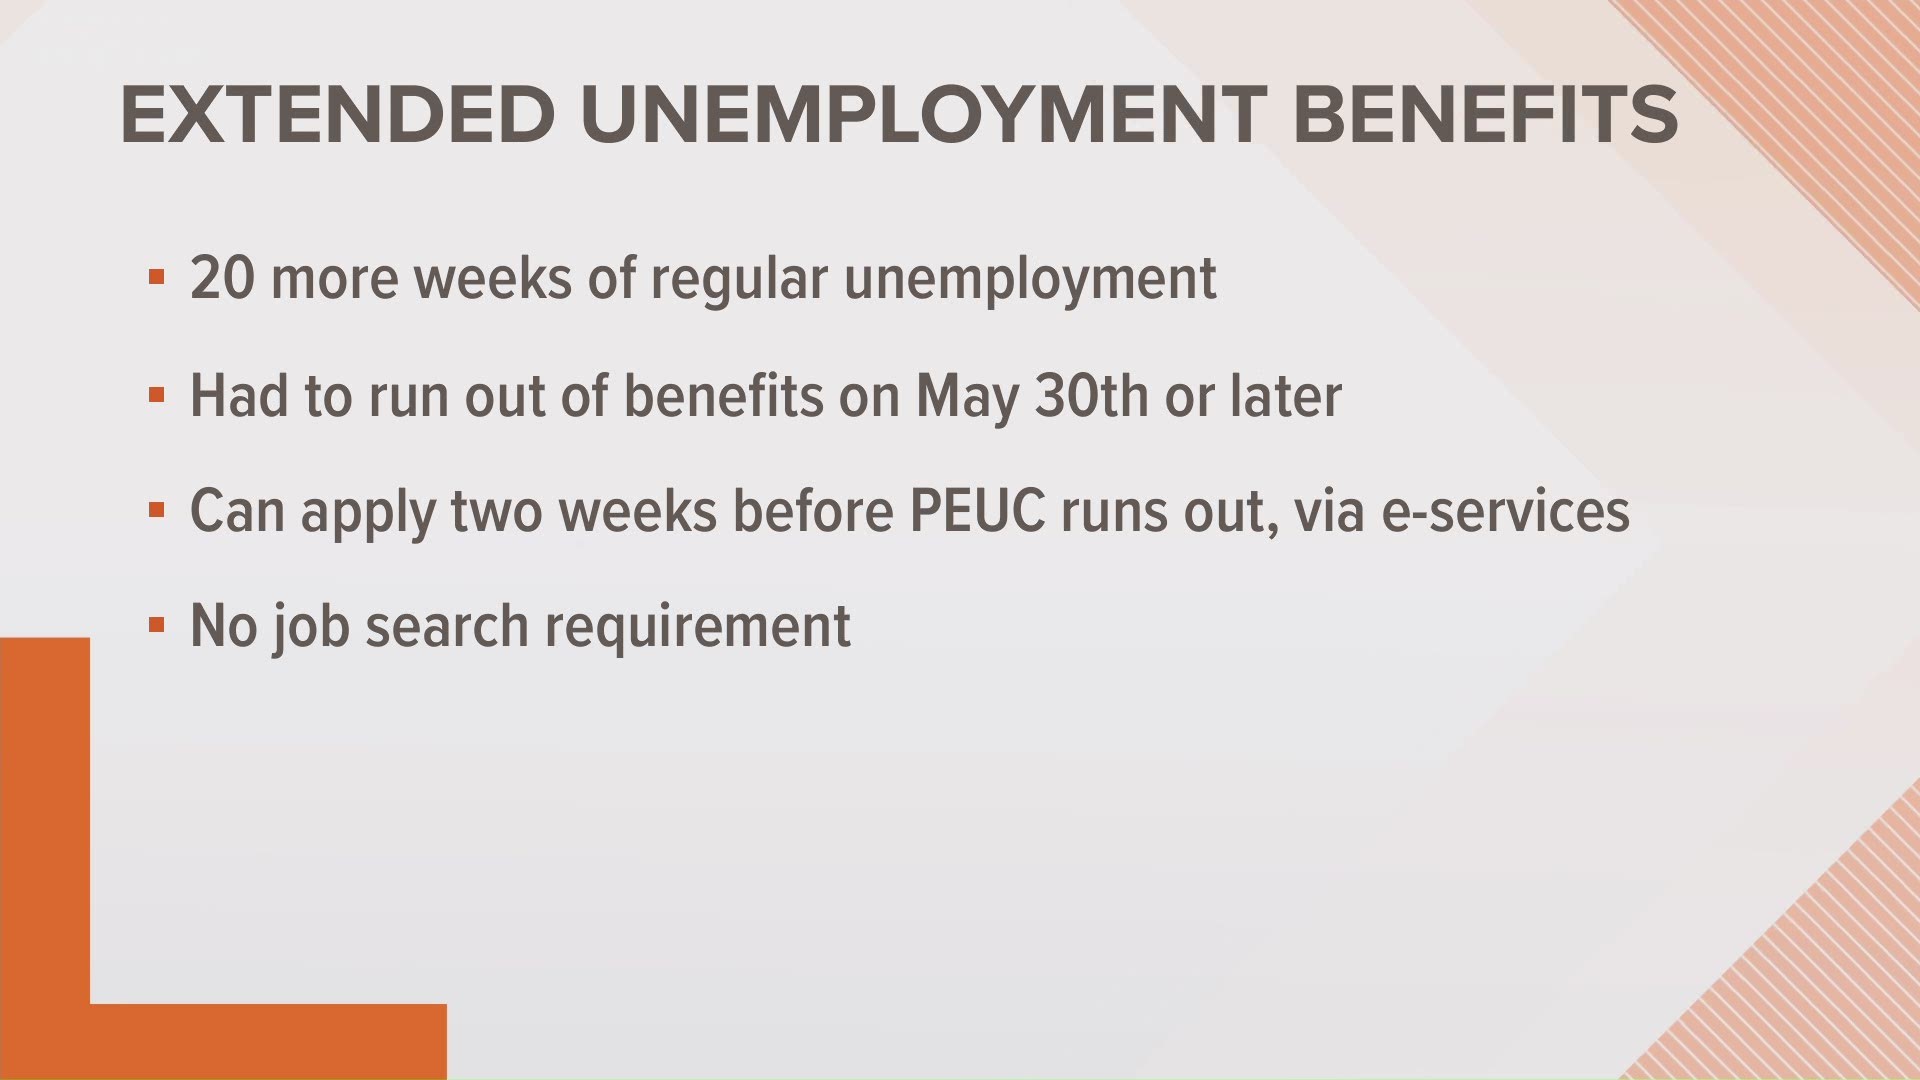 Under the extended benefits program, there is an extra 20 weeks of regular unemployment available in Washington state.